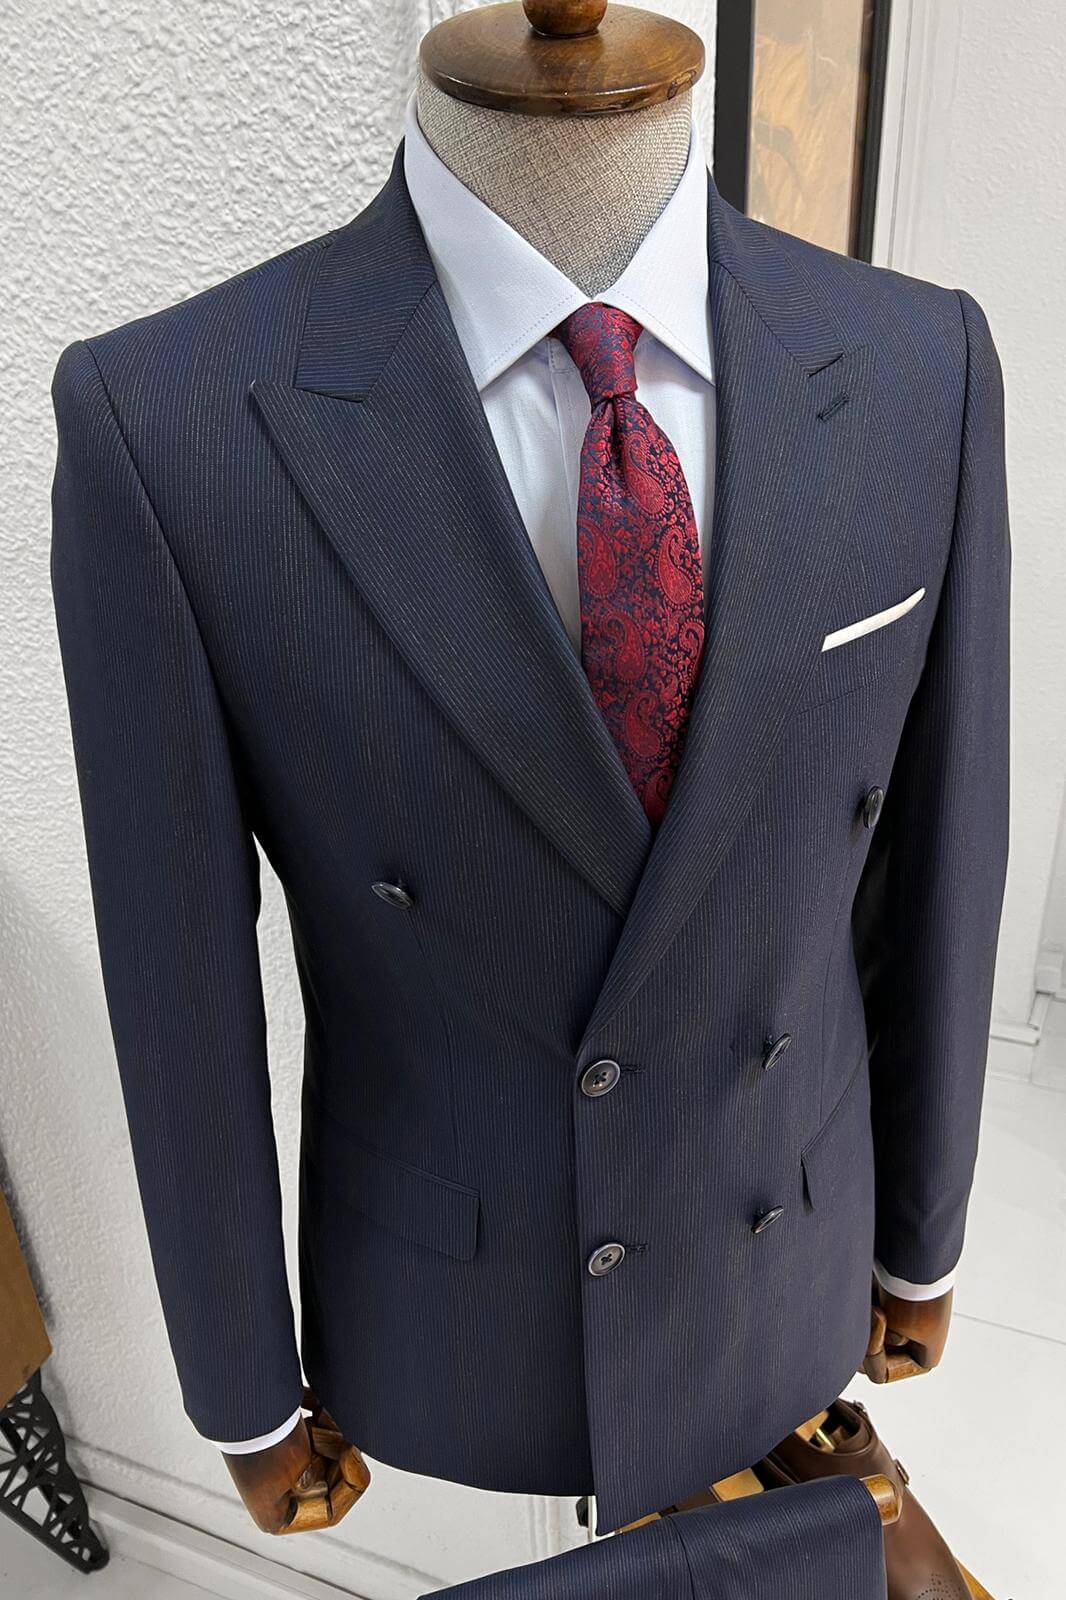 A Slim-fit stripped double-breasted Navy Blue wool suit on display